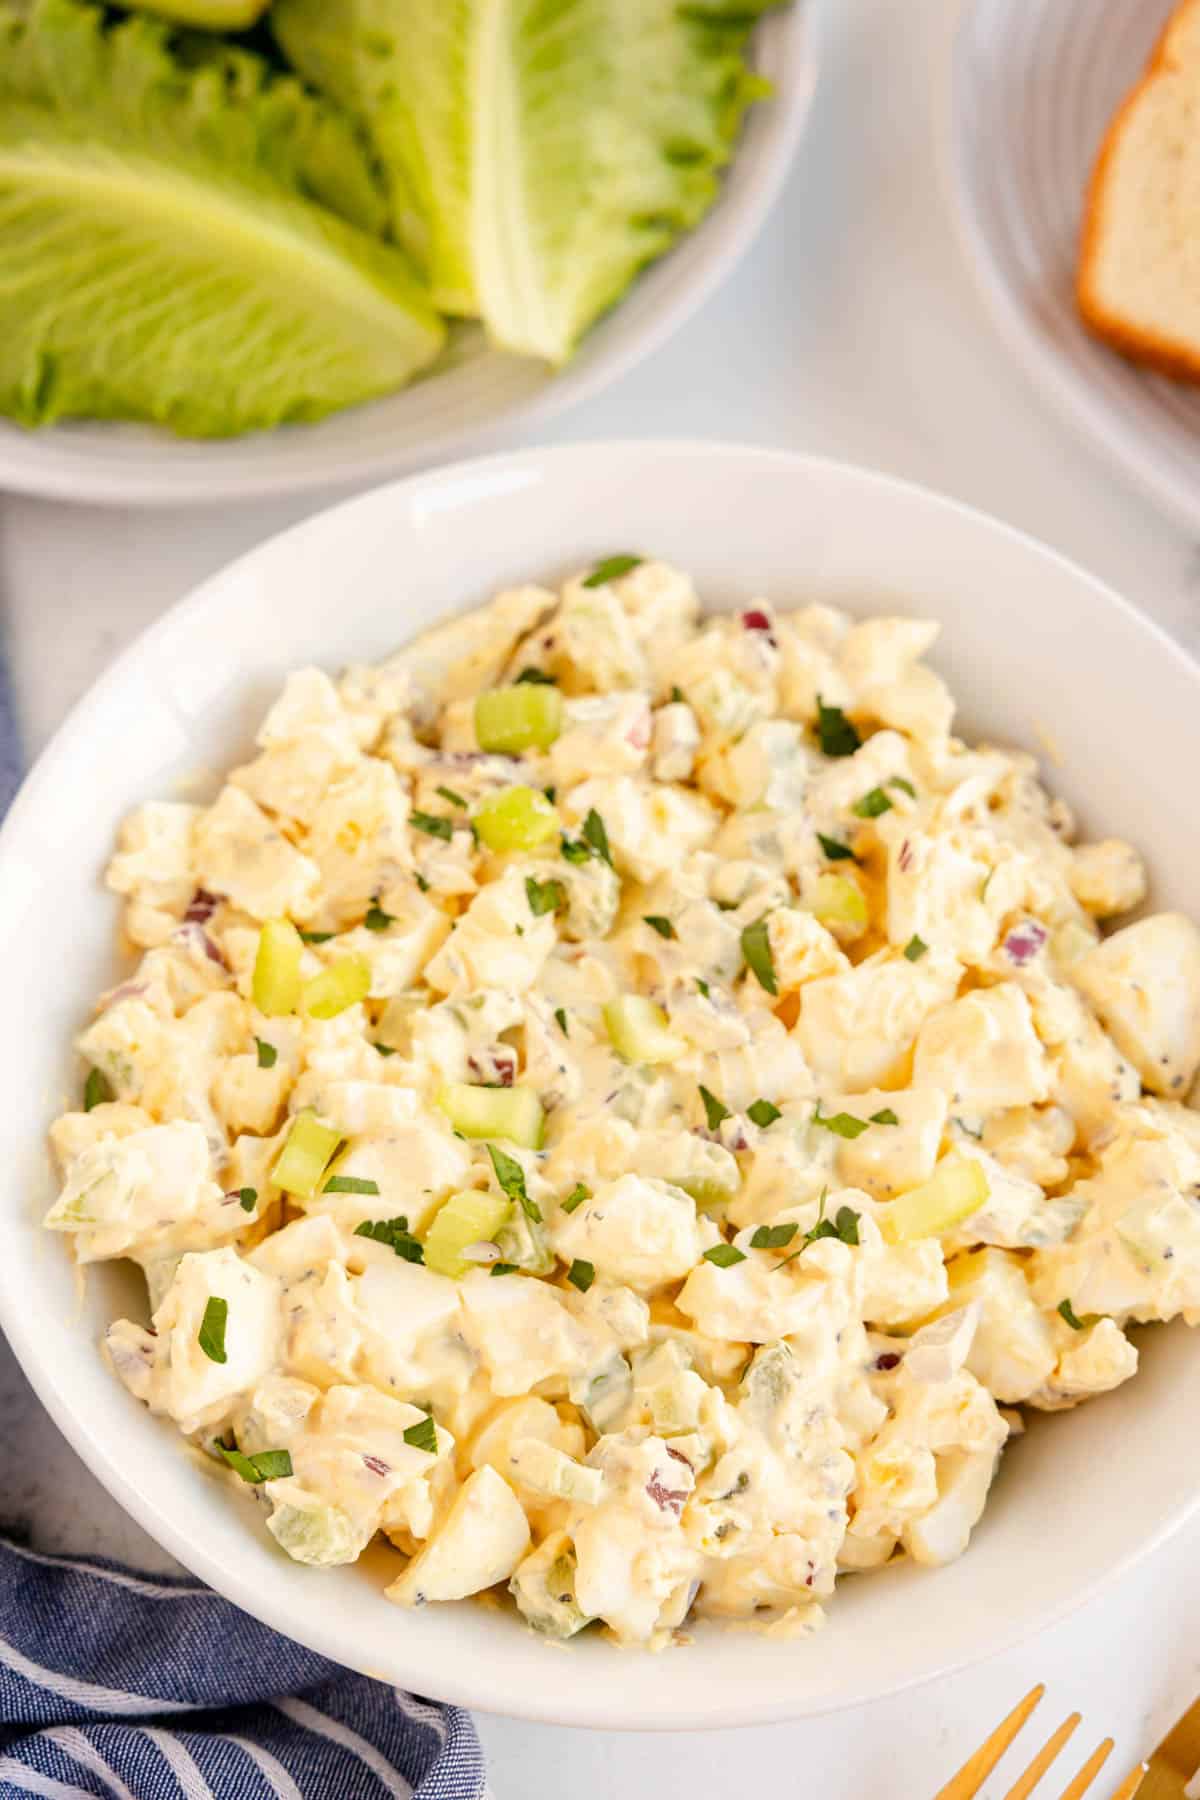 egg salad in a white bowl.